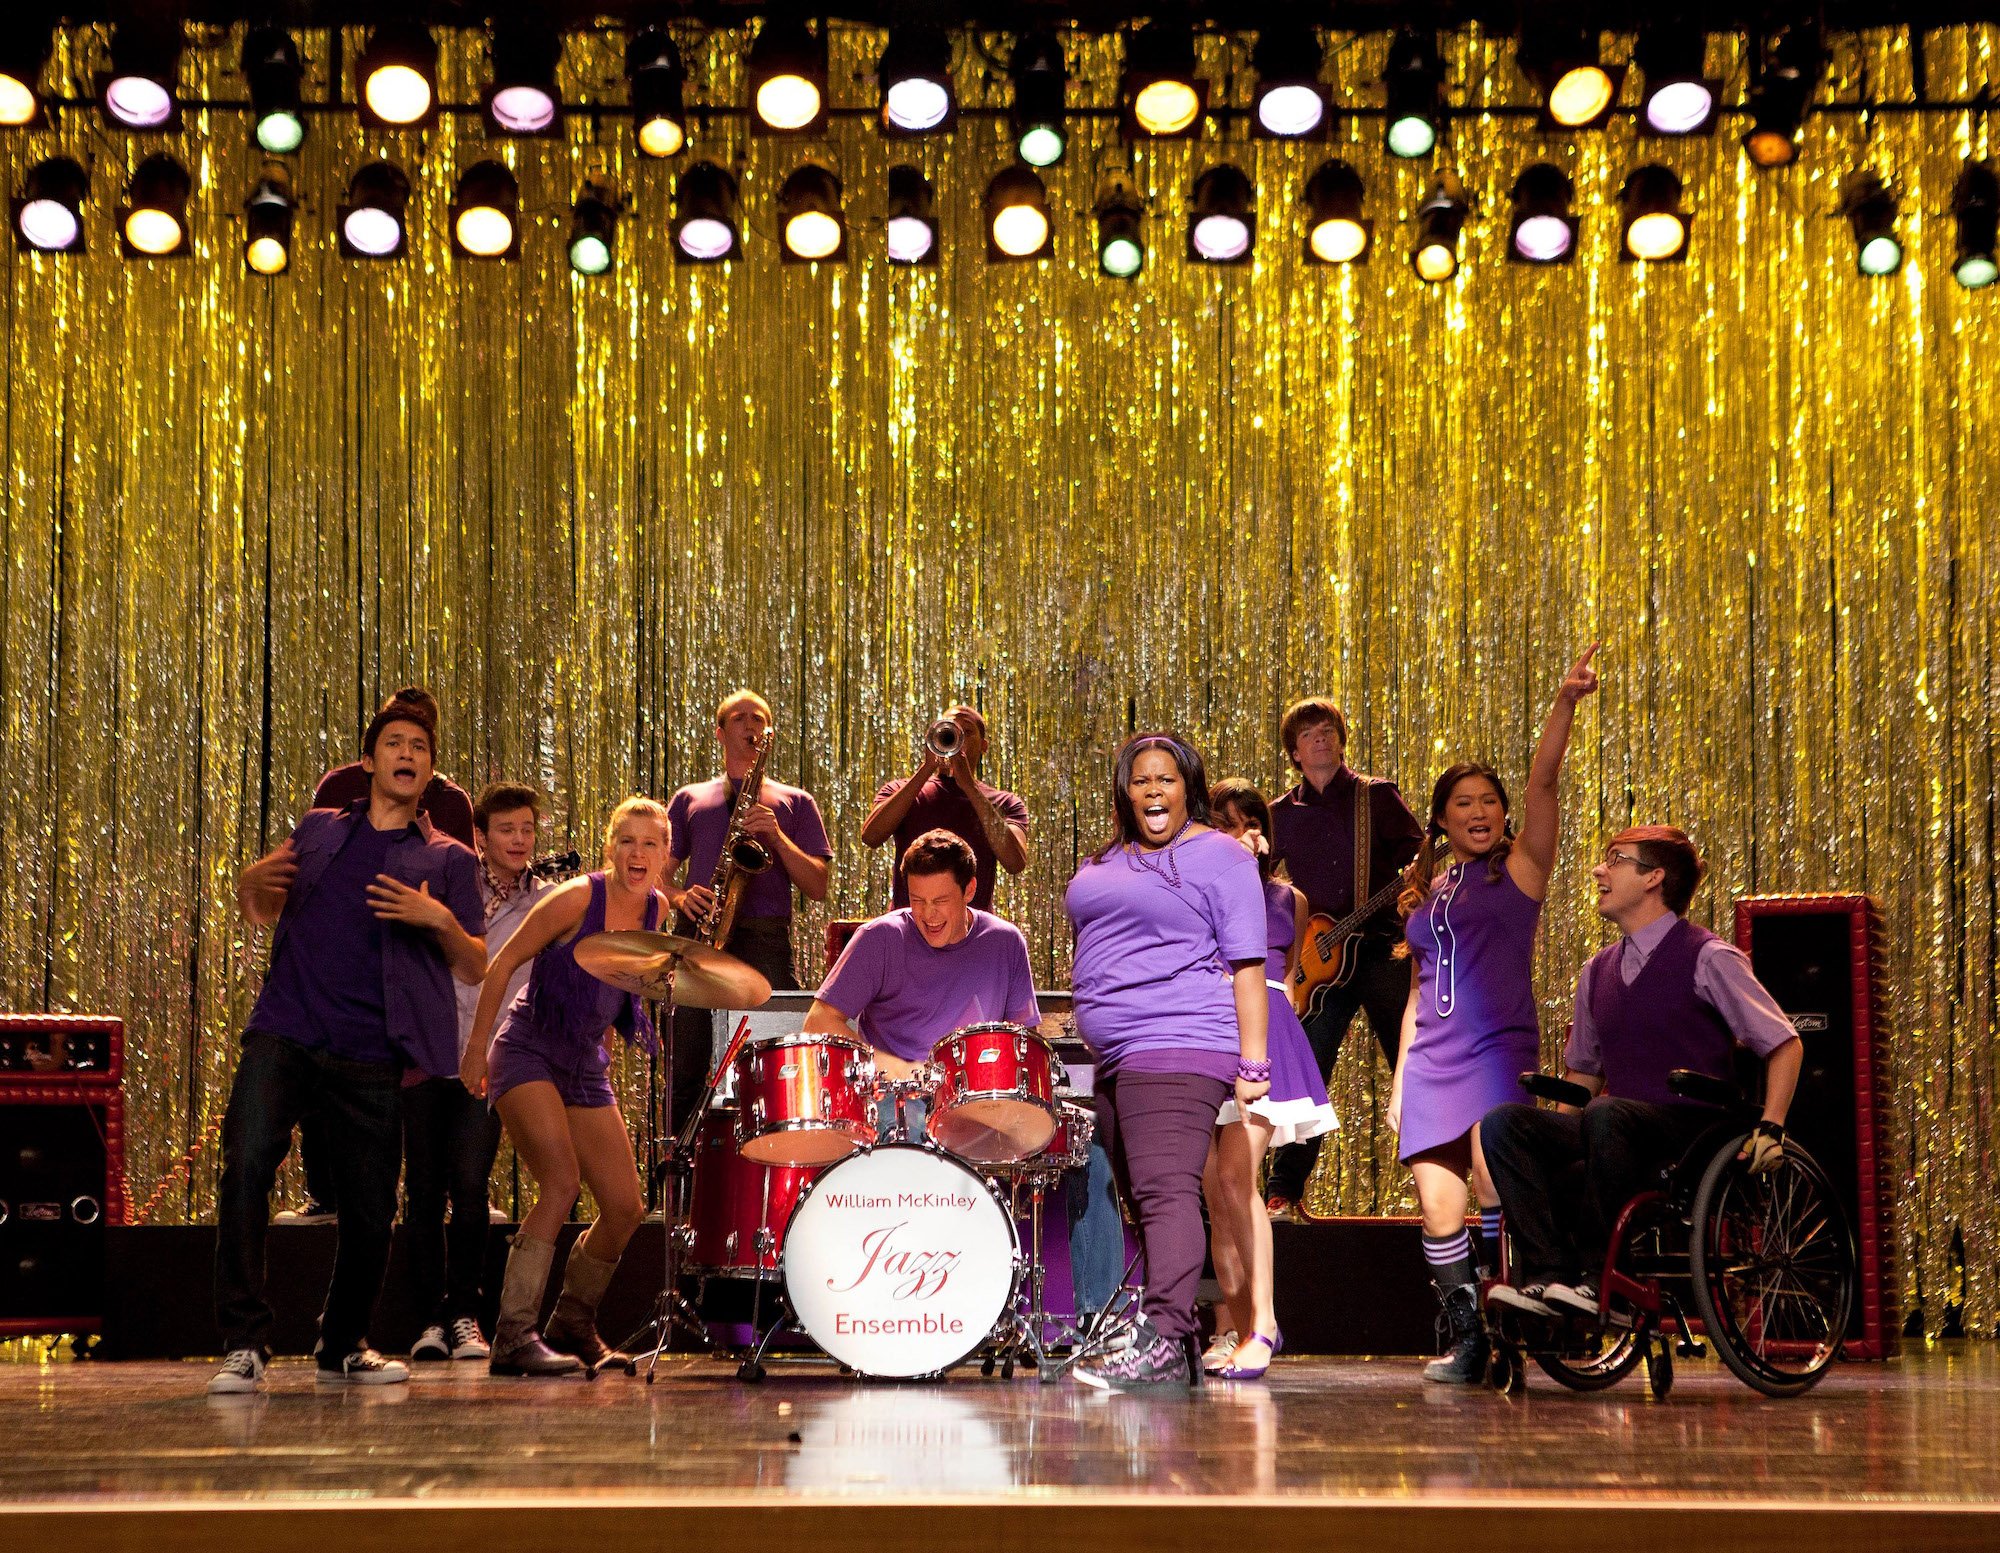 The New Directions of 'Glee' in the Season 3 premiere episode, "The Purple Piano Project"